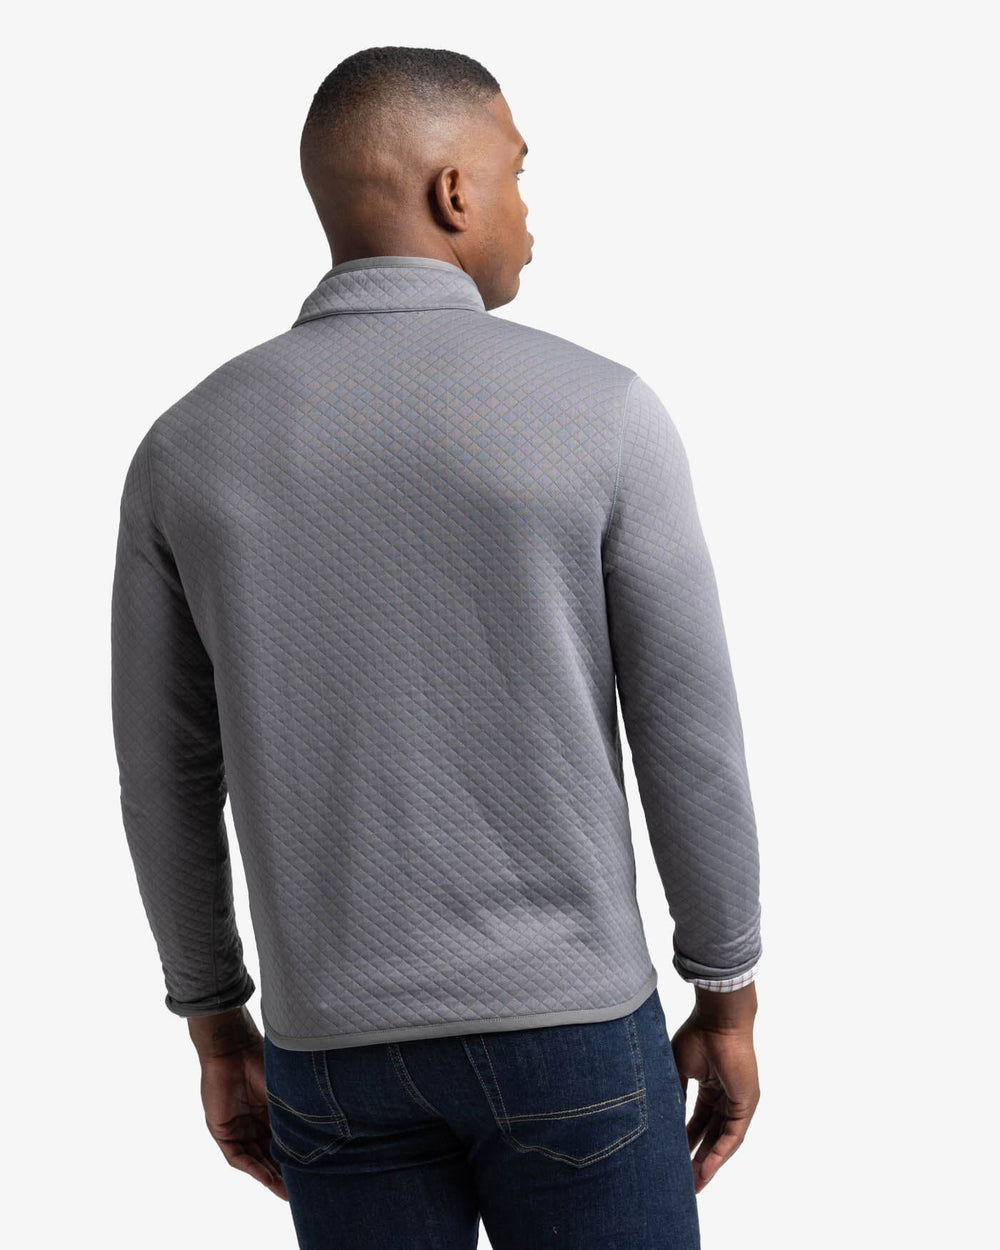 The back view of the Southern Tide Arden Reversible Quarter Zip by Southern Tide - Shadow Grey